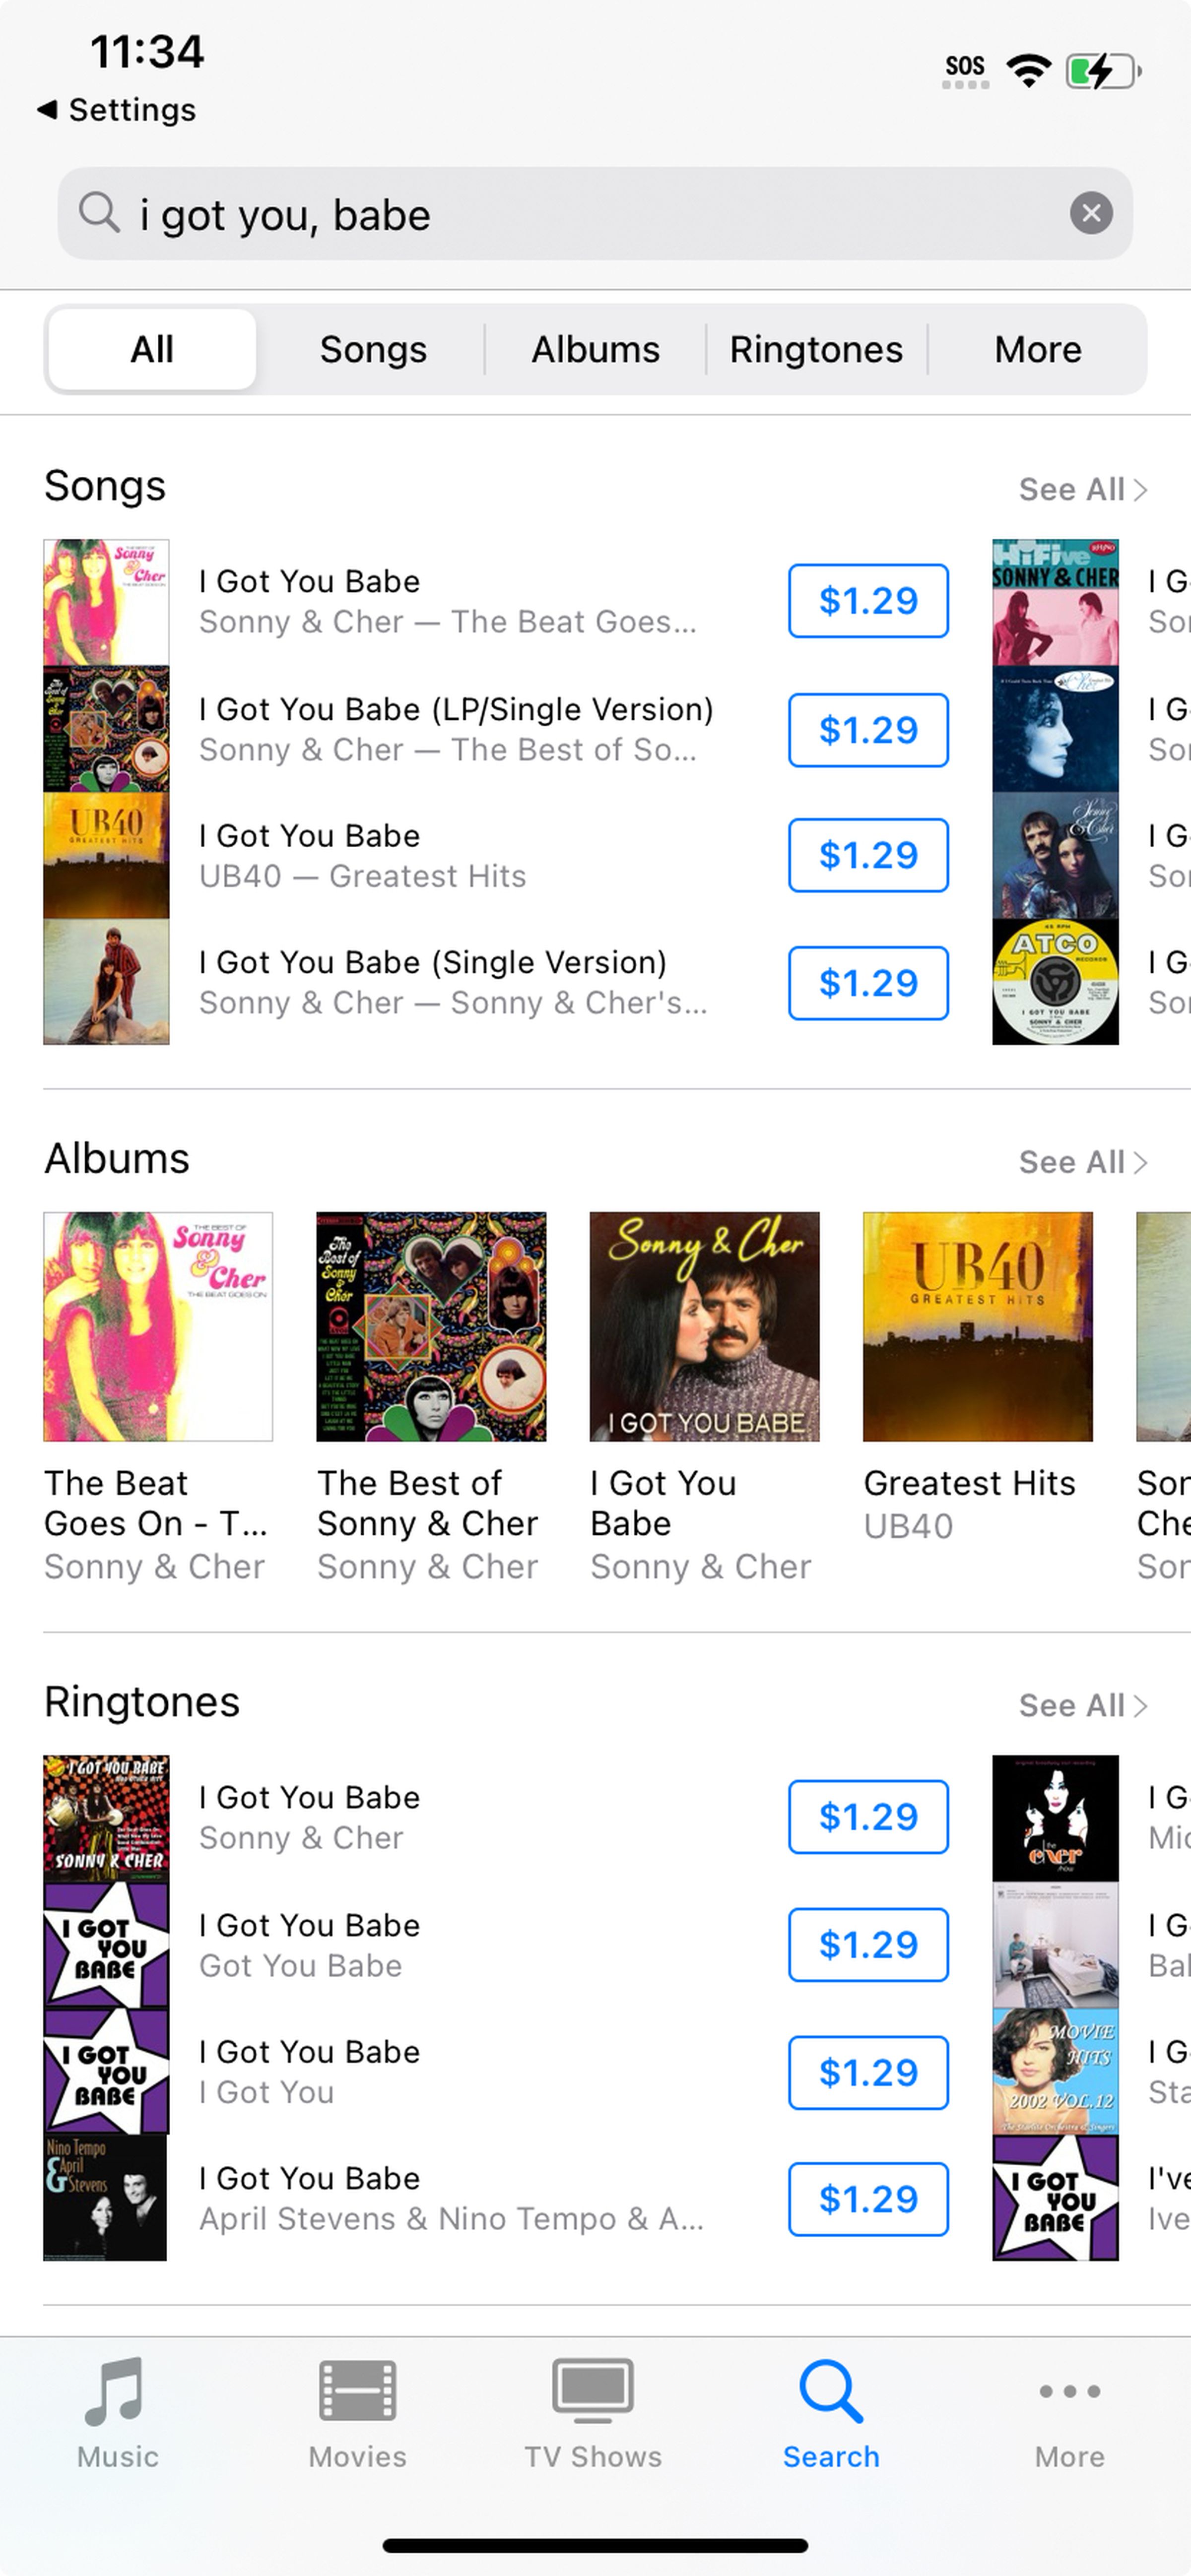 iTunes store showing results from “I got you, babe” search.